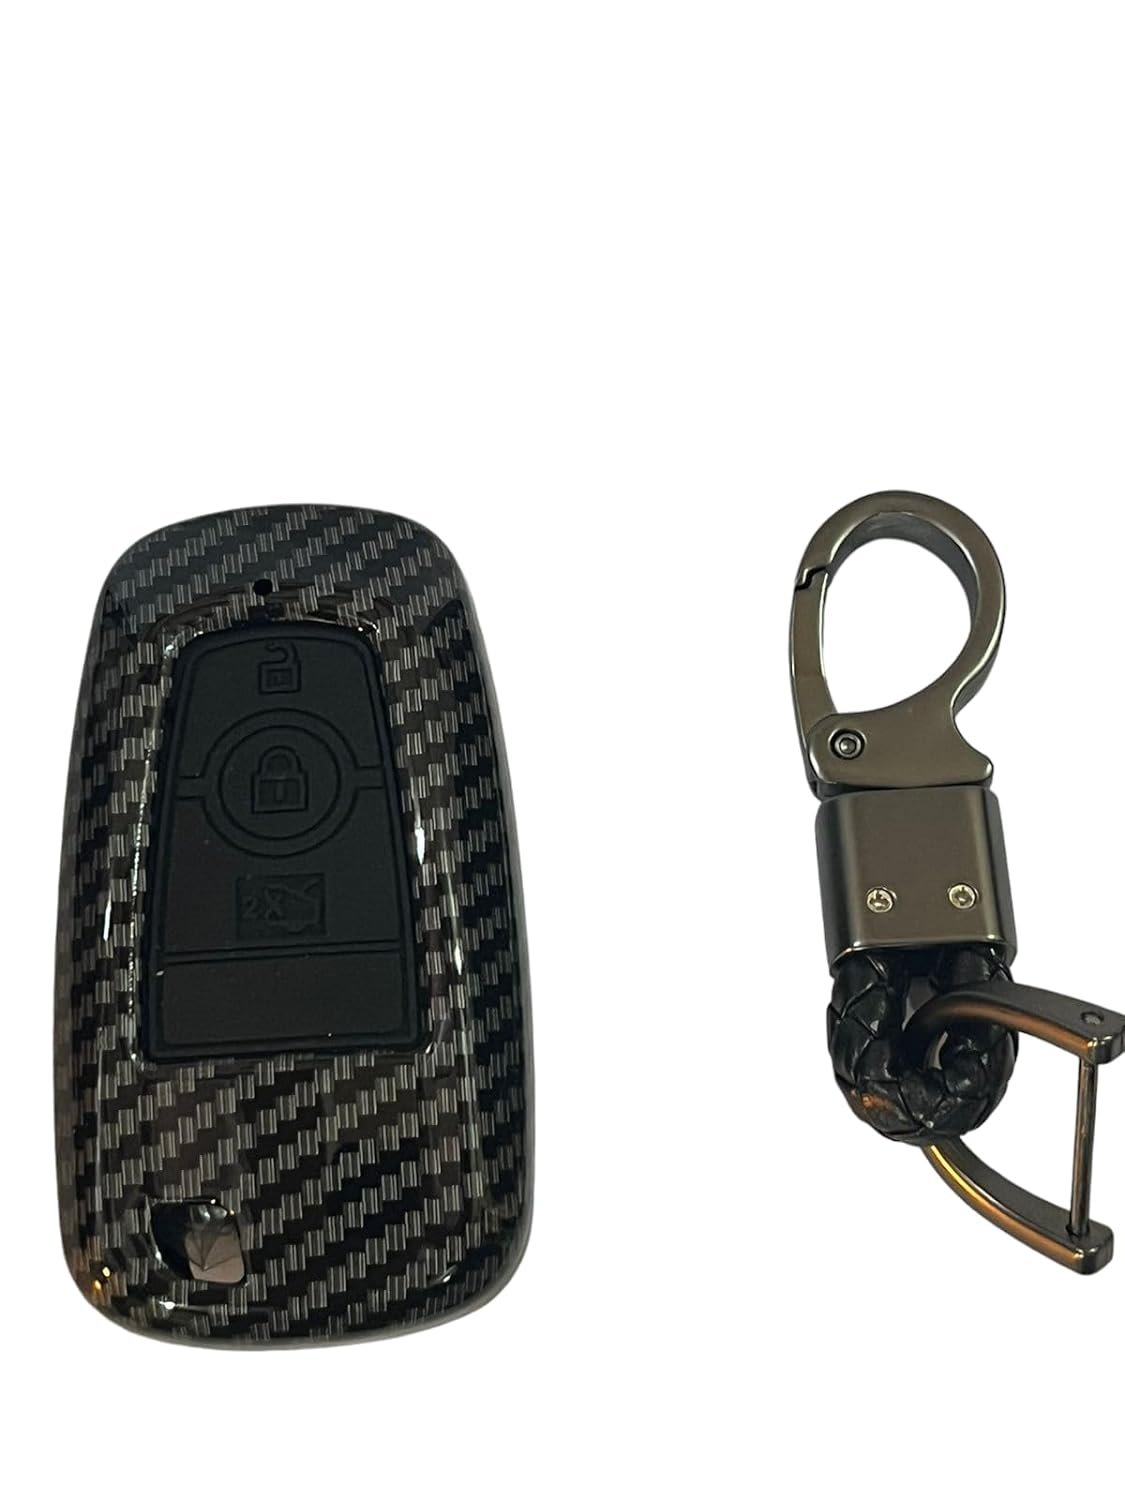 Carbon Fiber ABS Car Key Cover Compatible with Endeavour, Figo, Aspire (Key Chain Included) Image 